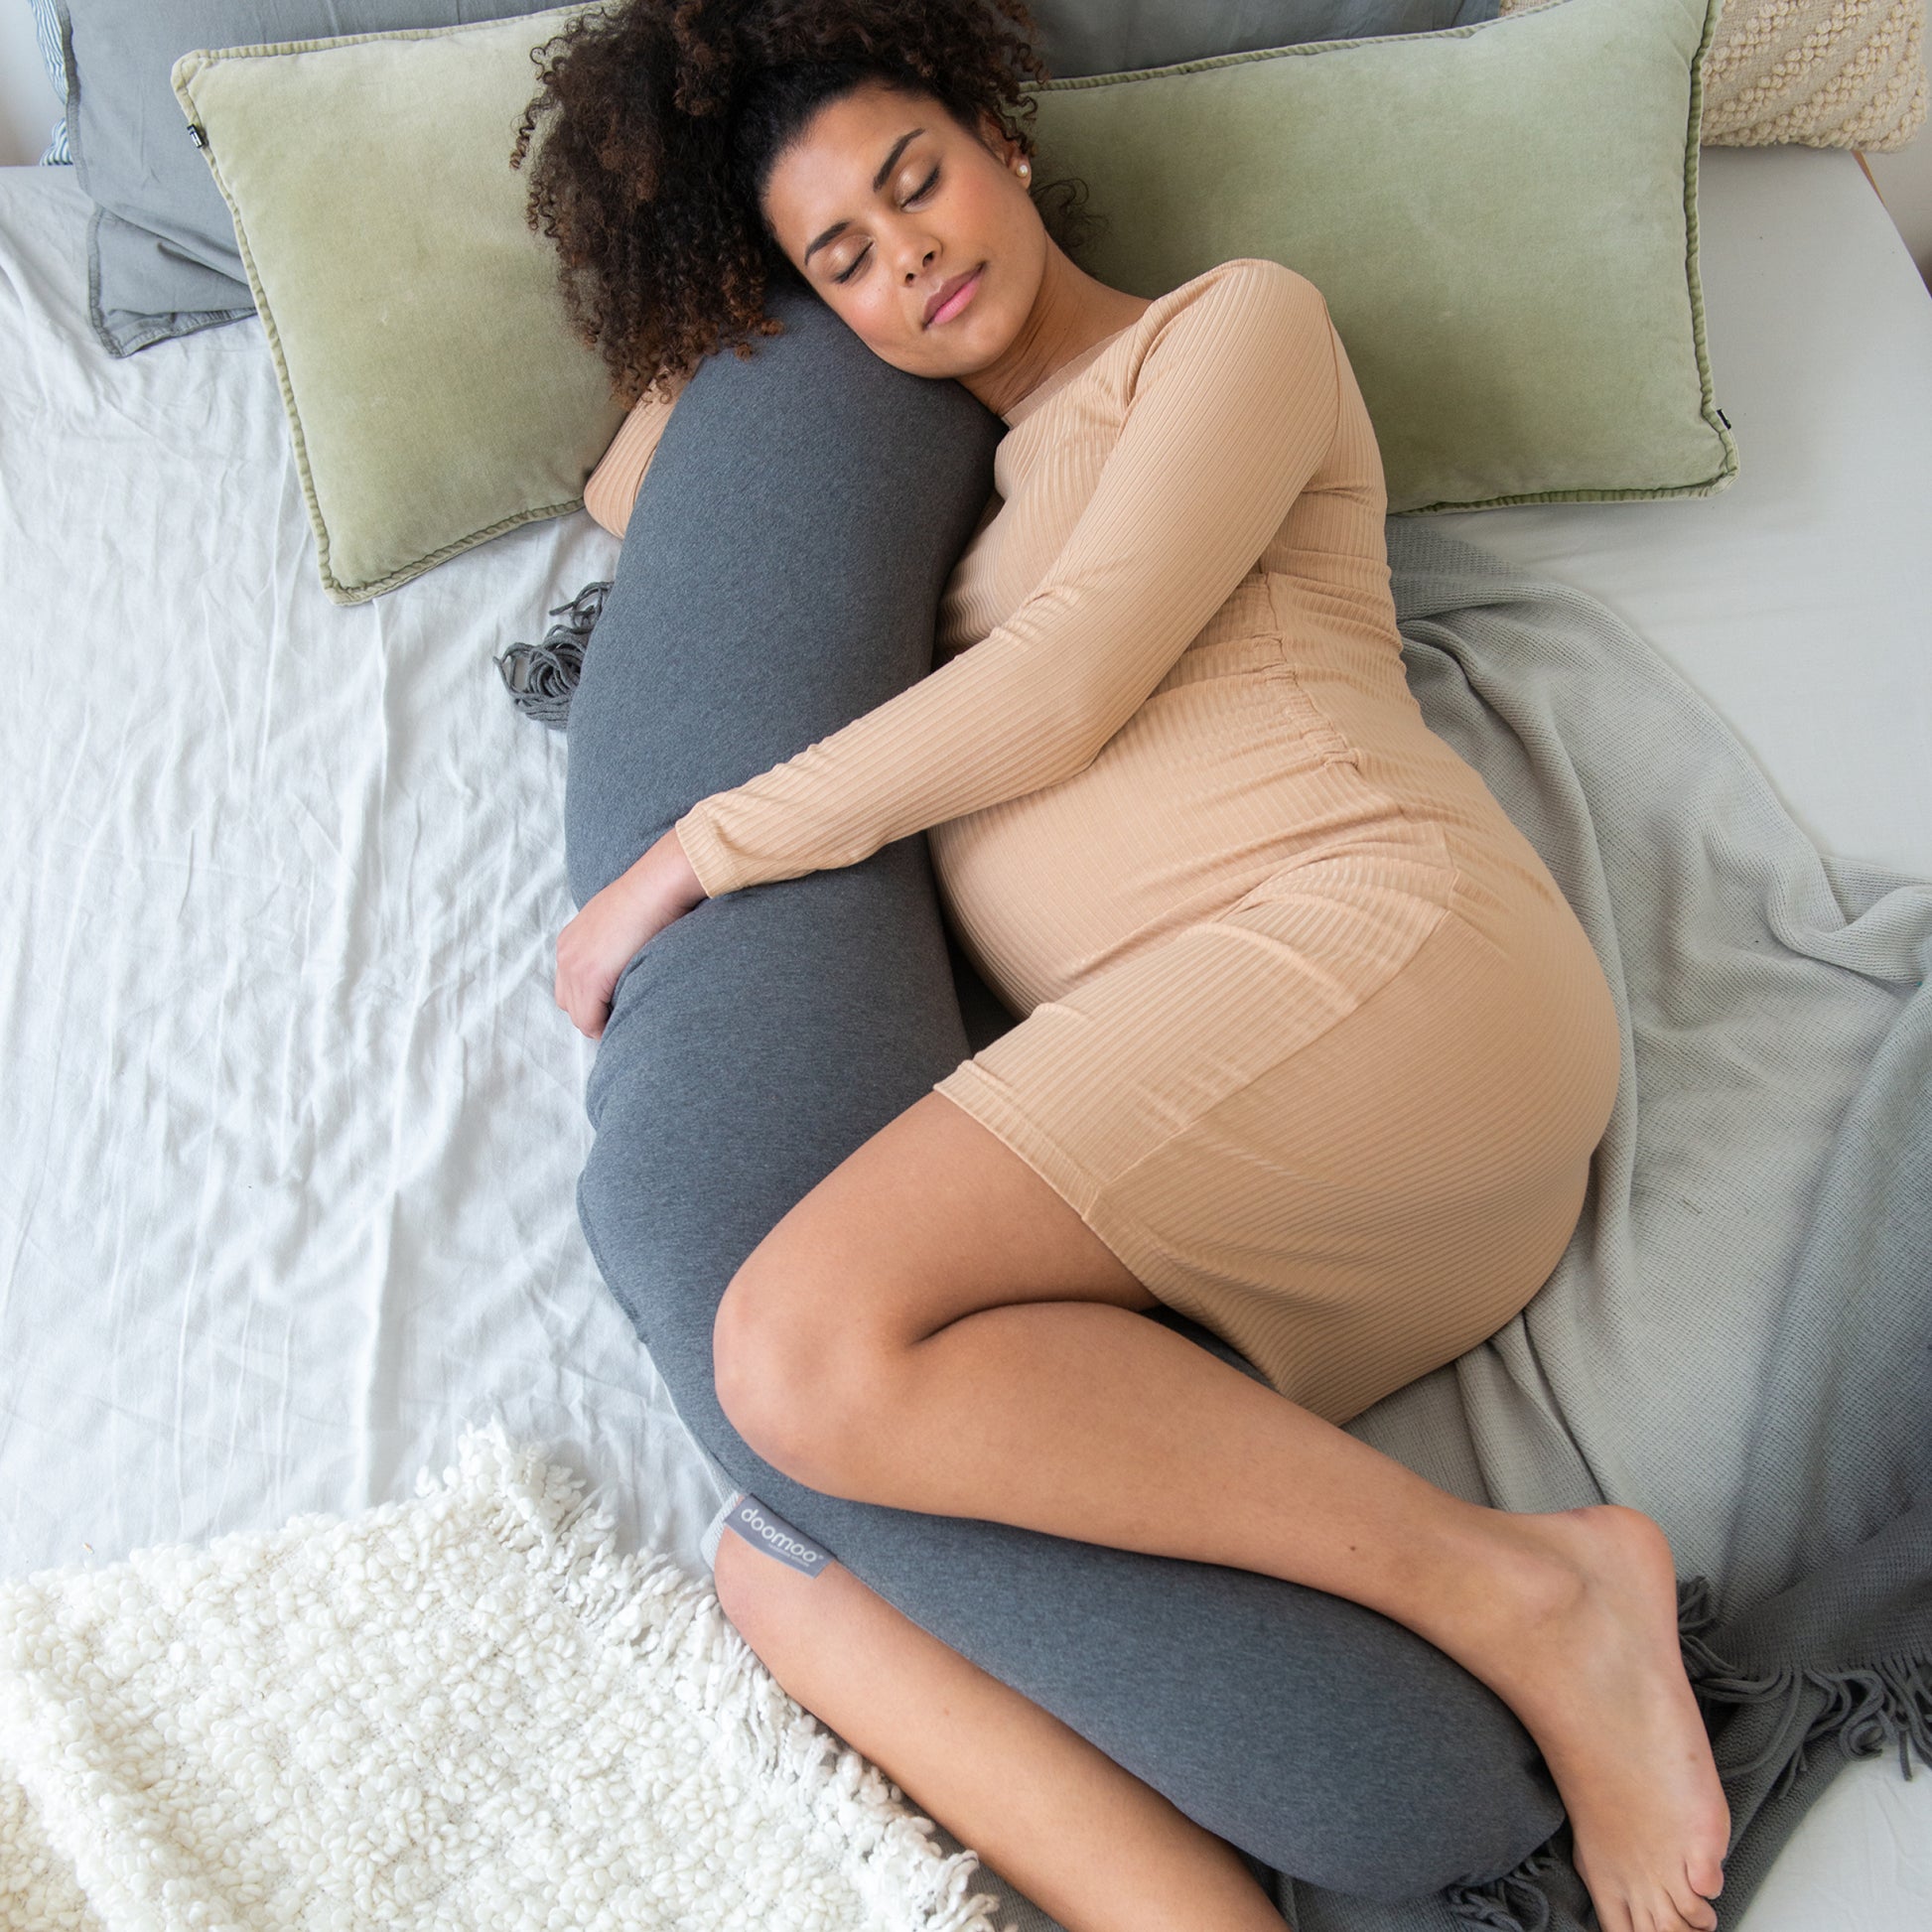 Large pregnancy and maternity pillow – doomoo shop